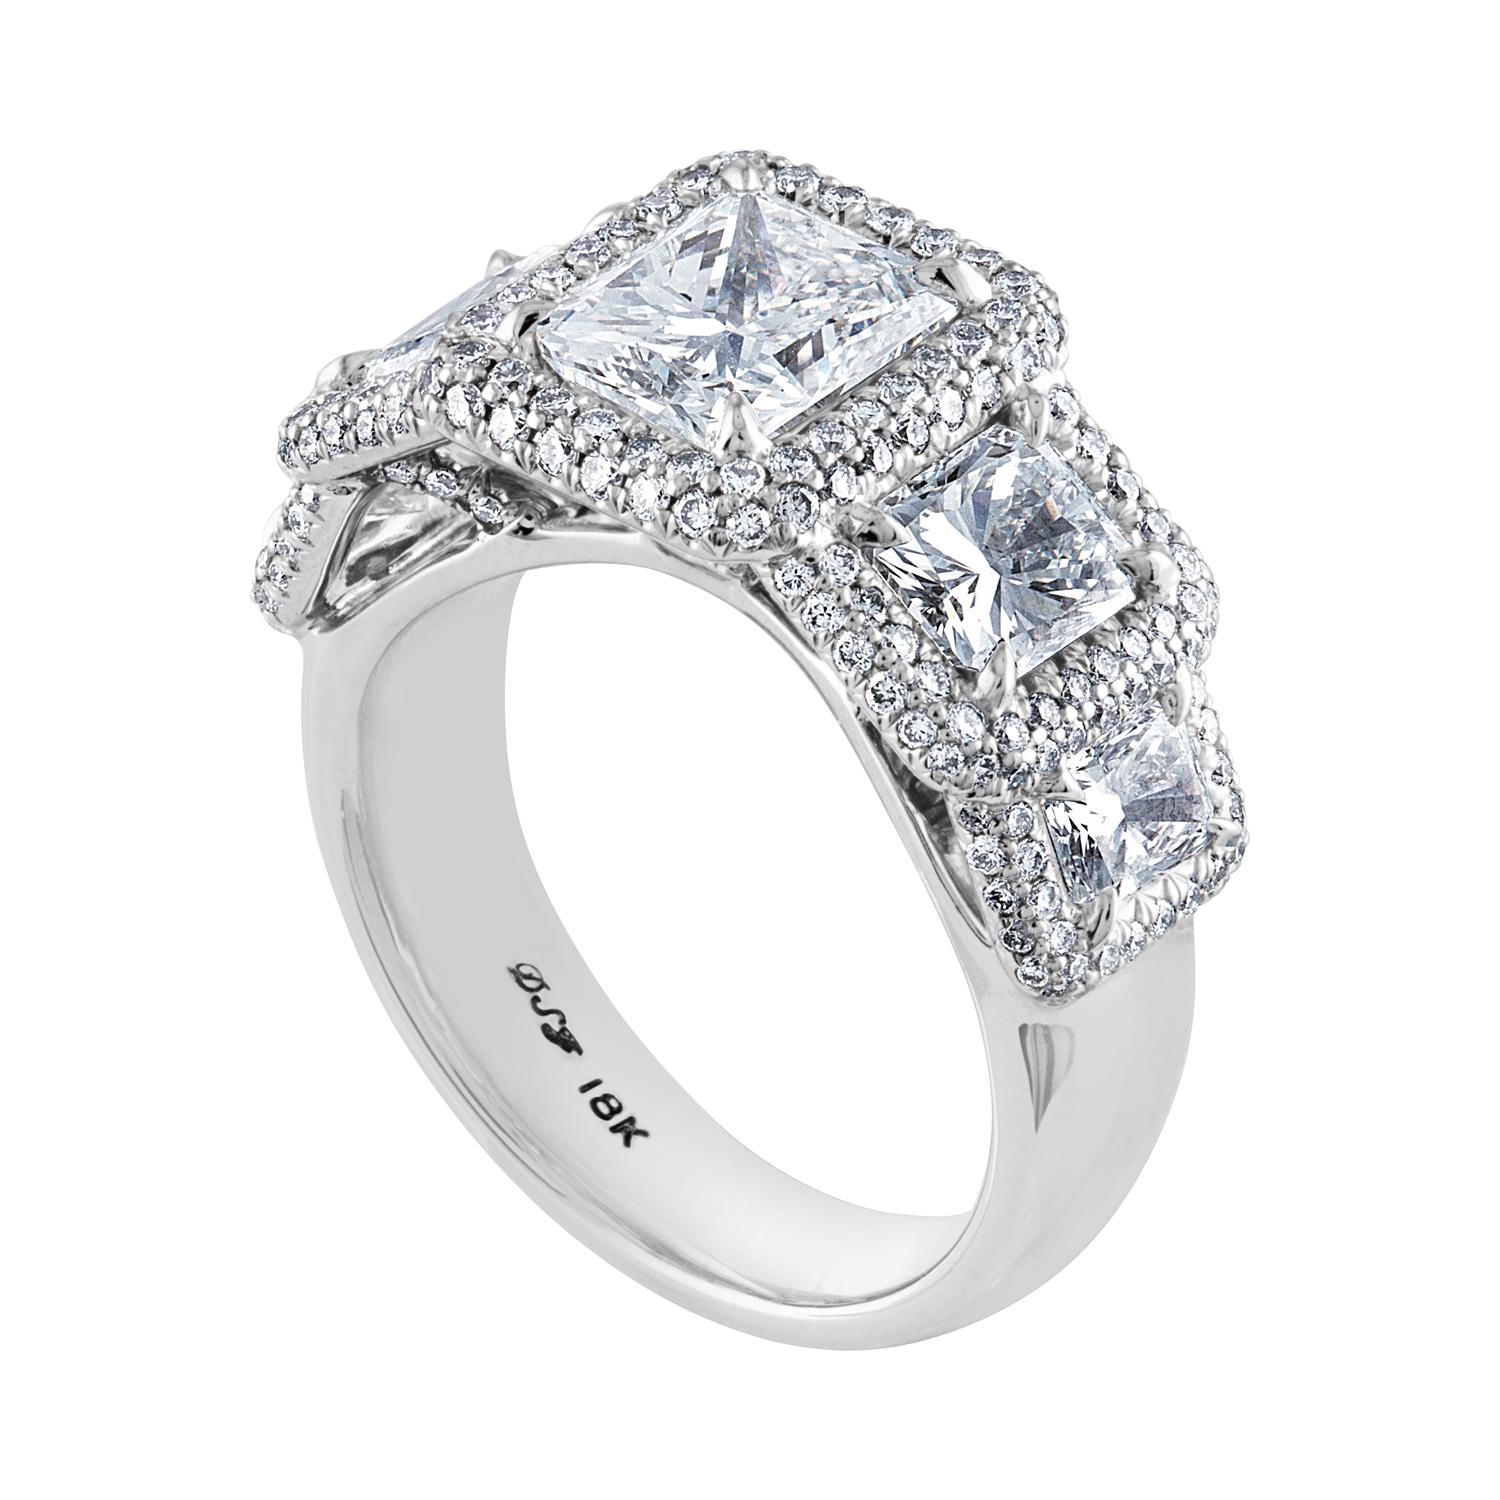 5 stone Radiant Cut Ring
The ring is 18K/750 white gold
The ring has a center stone GIA 2.01CT E VS2
The side stone is GIA 0.70CT E VS2
The side stone is GIA 0.73CT G VVS2
The smaller 2 Radiants are 0.60CT E VS
There are 0.77CT in small round